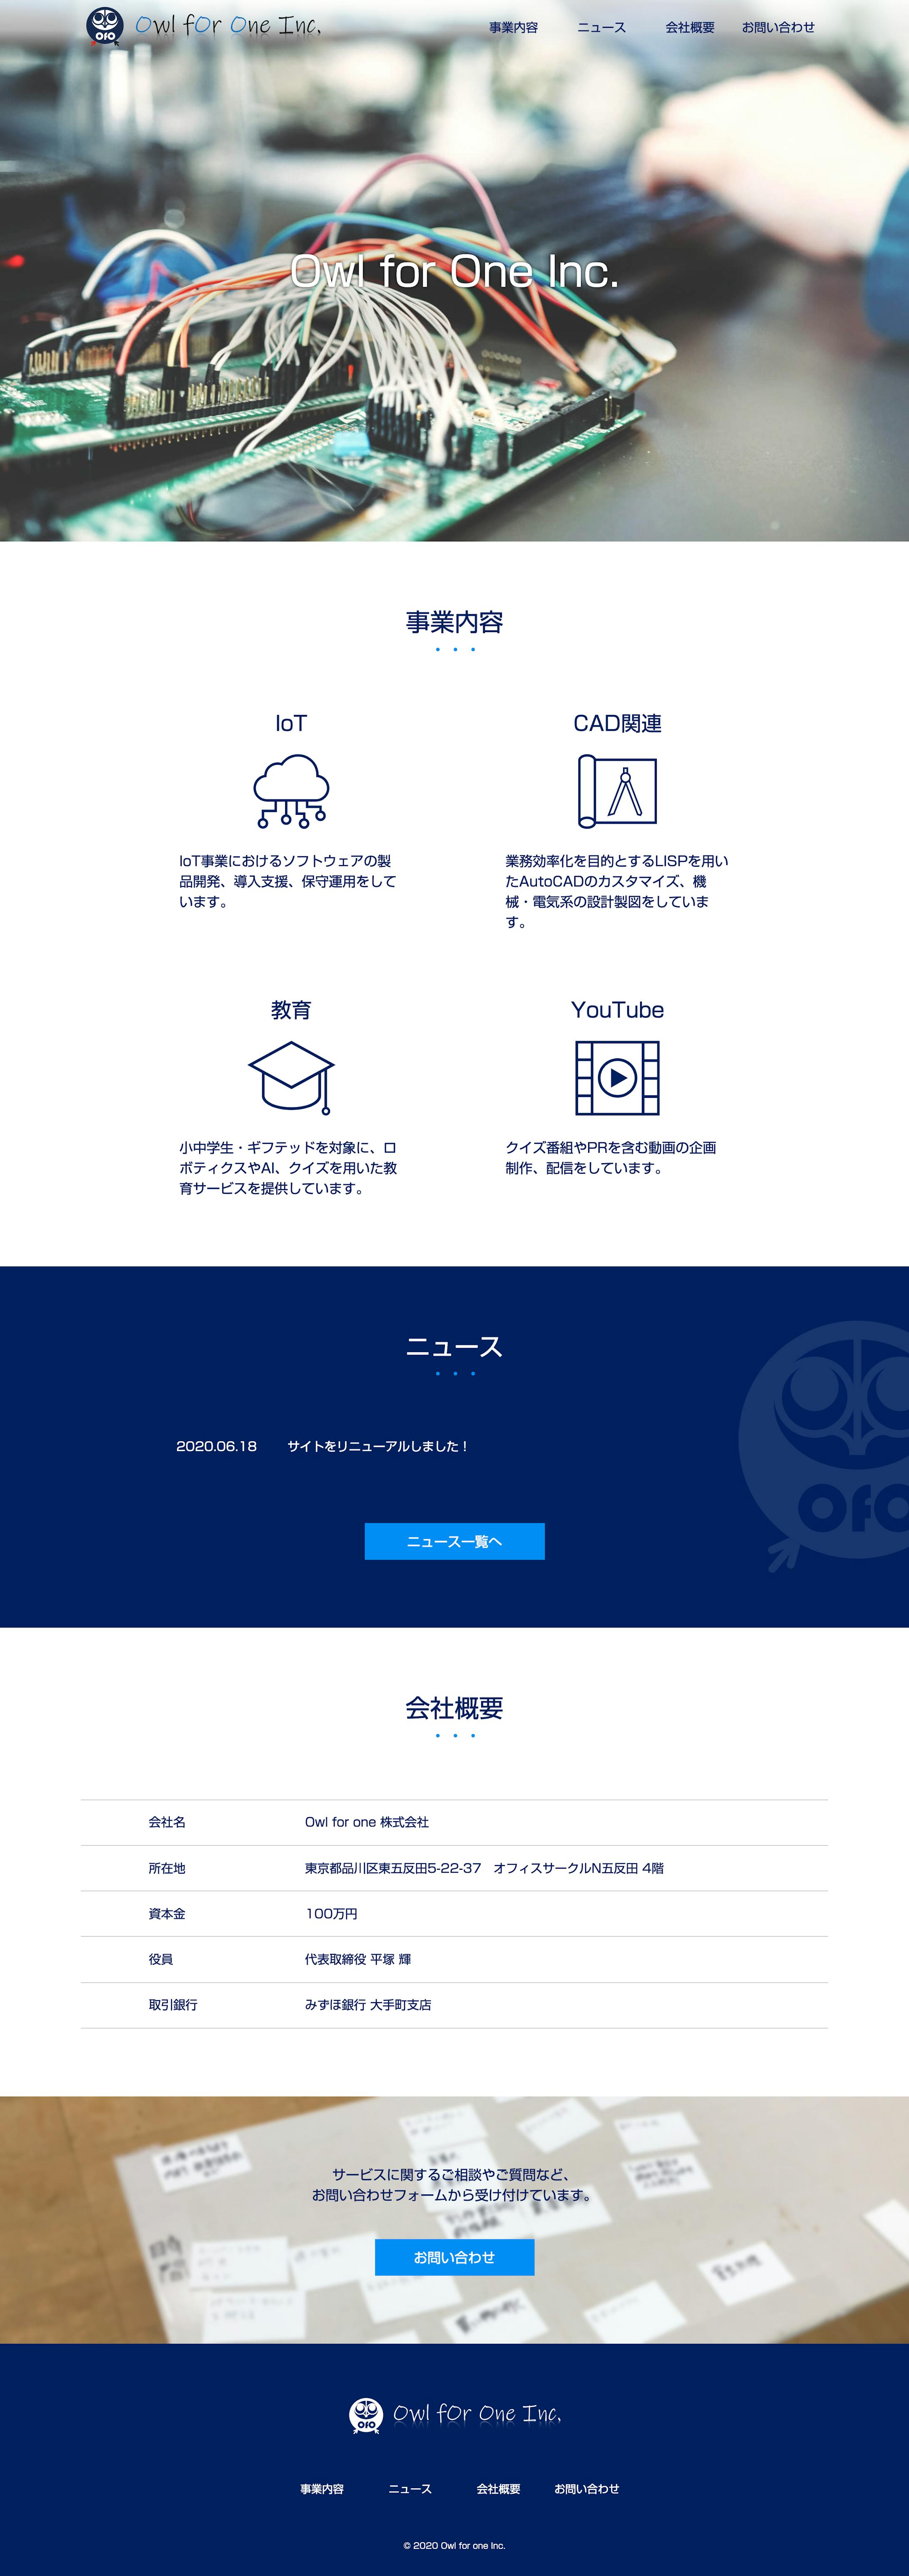 Owl for One の企業サイト-1